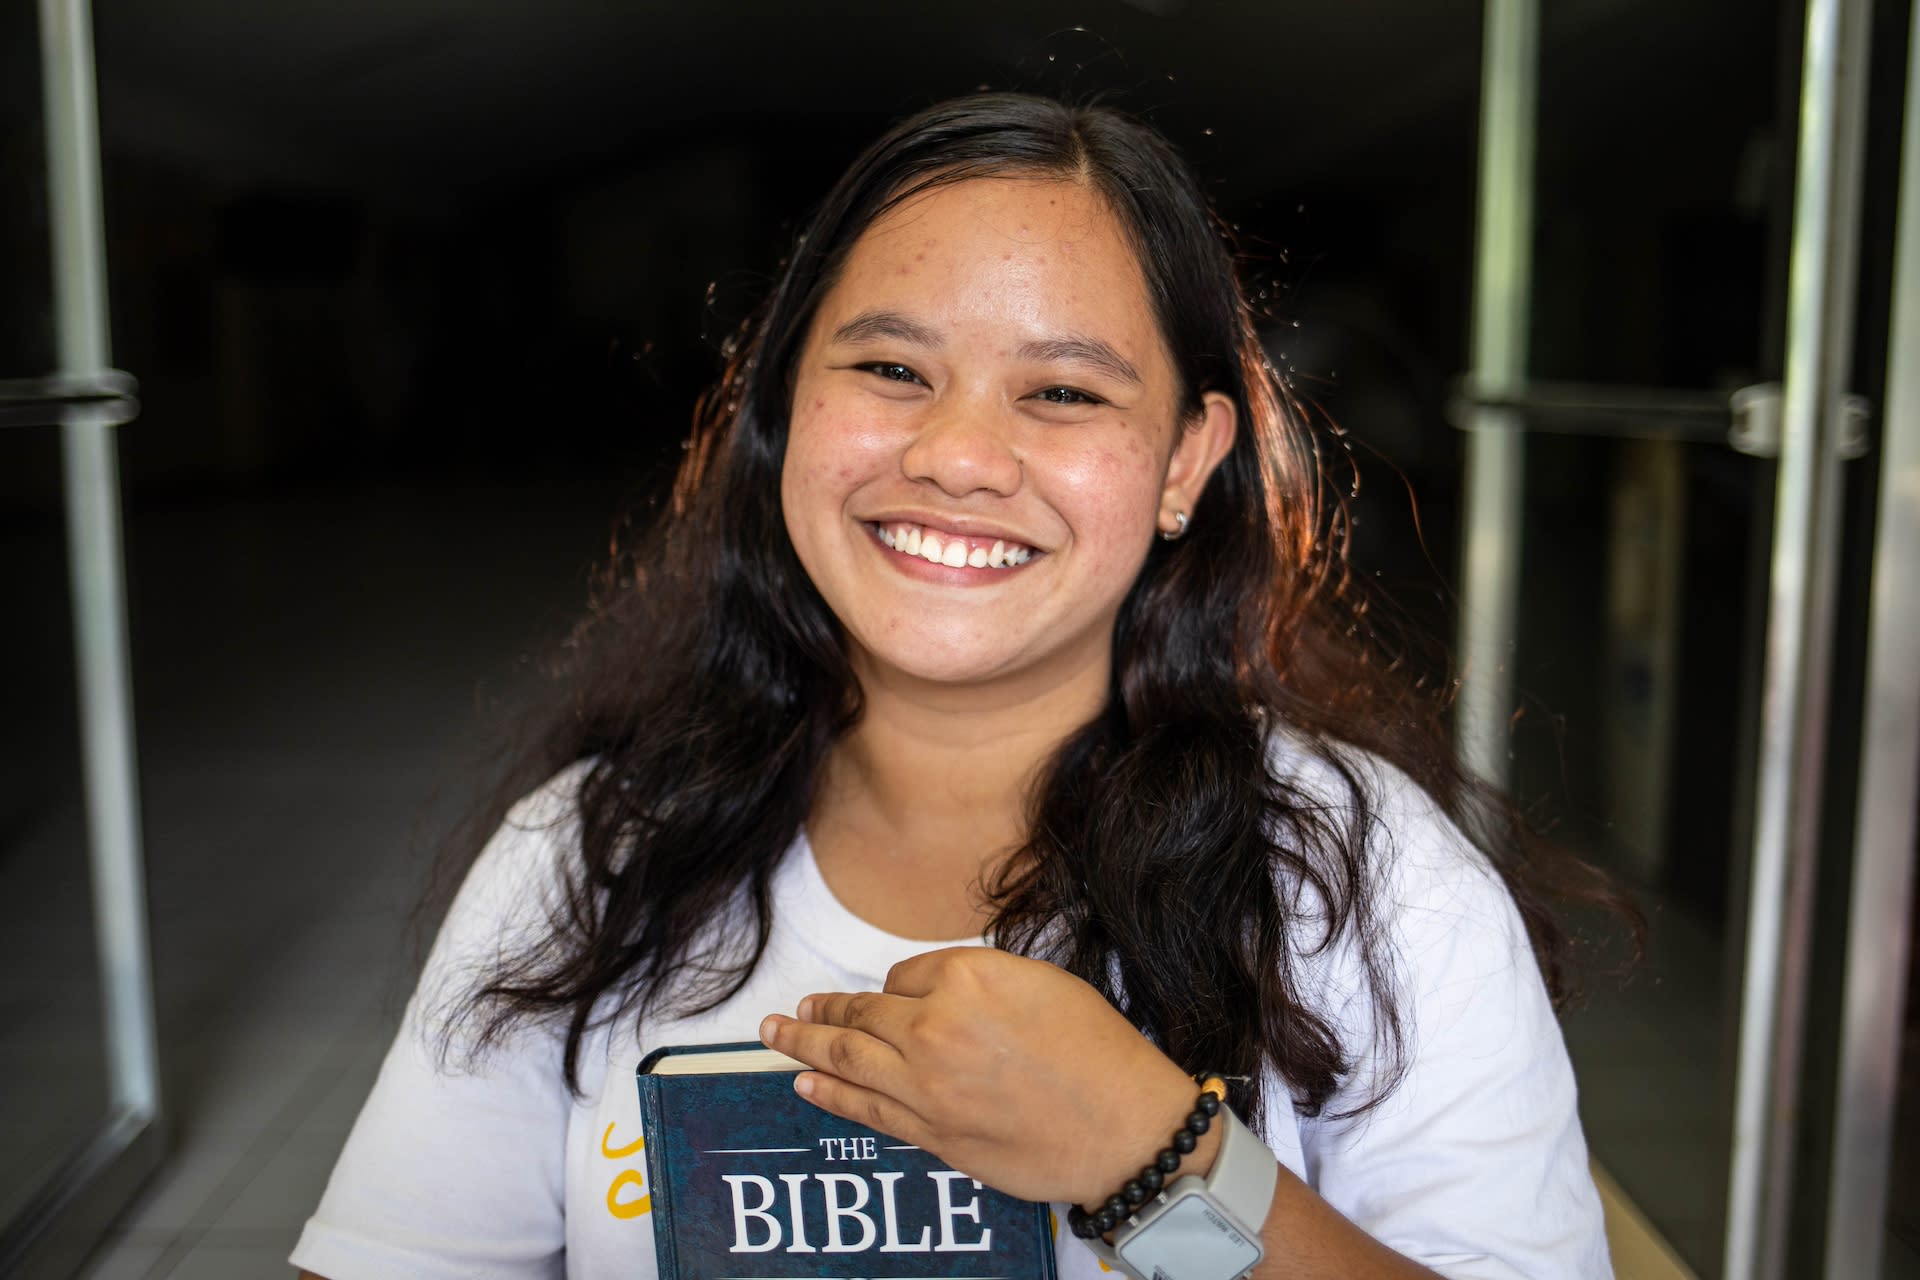 A young woman in the Philippines smiles and holds up her Bible.